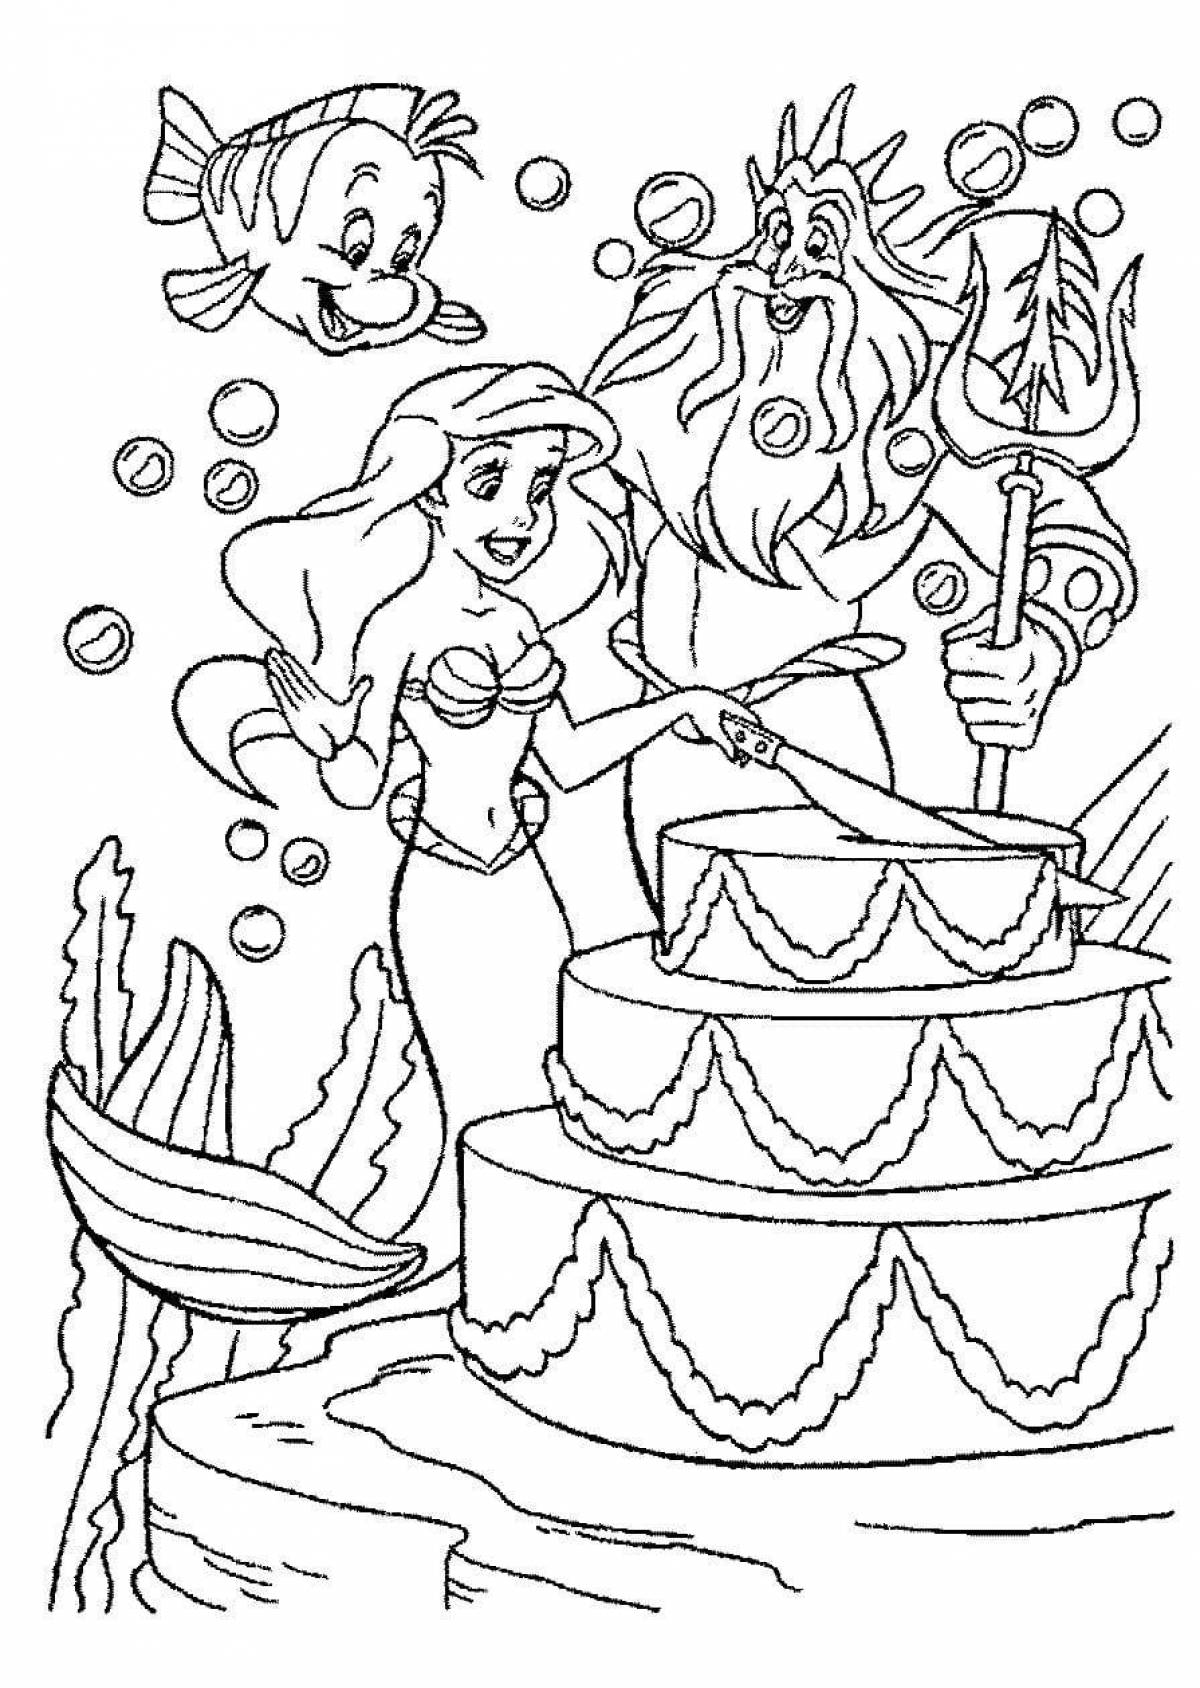 Glitter mermaid coloring book for kids